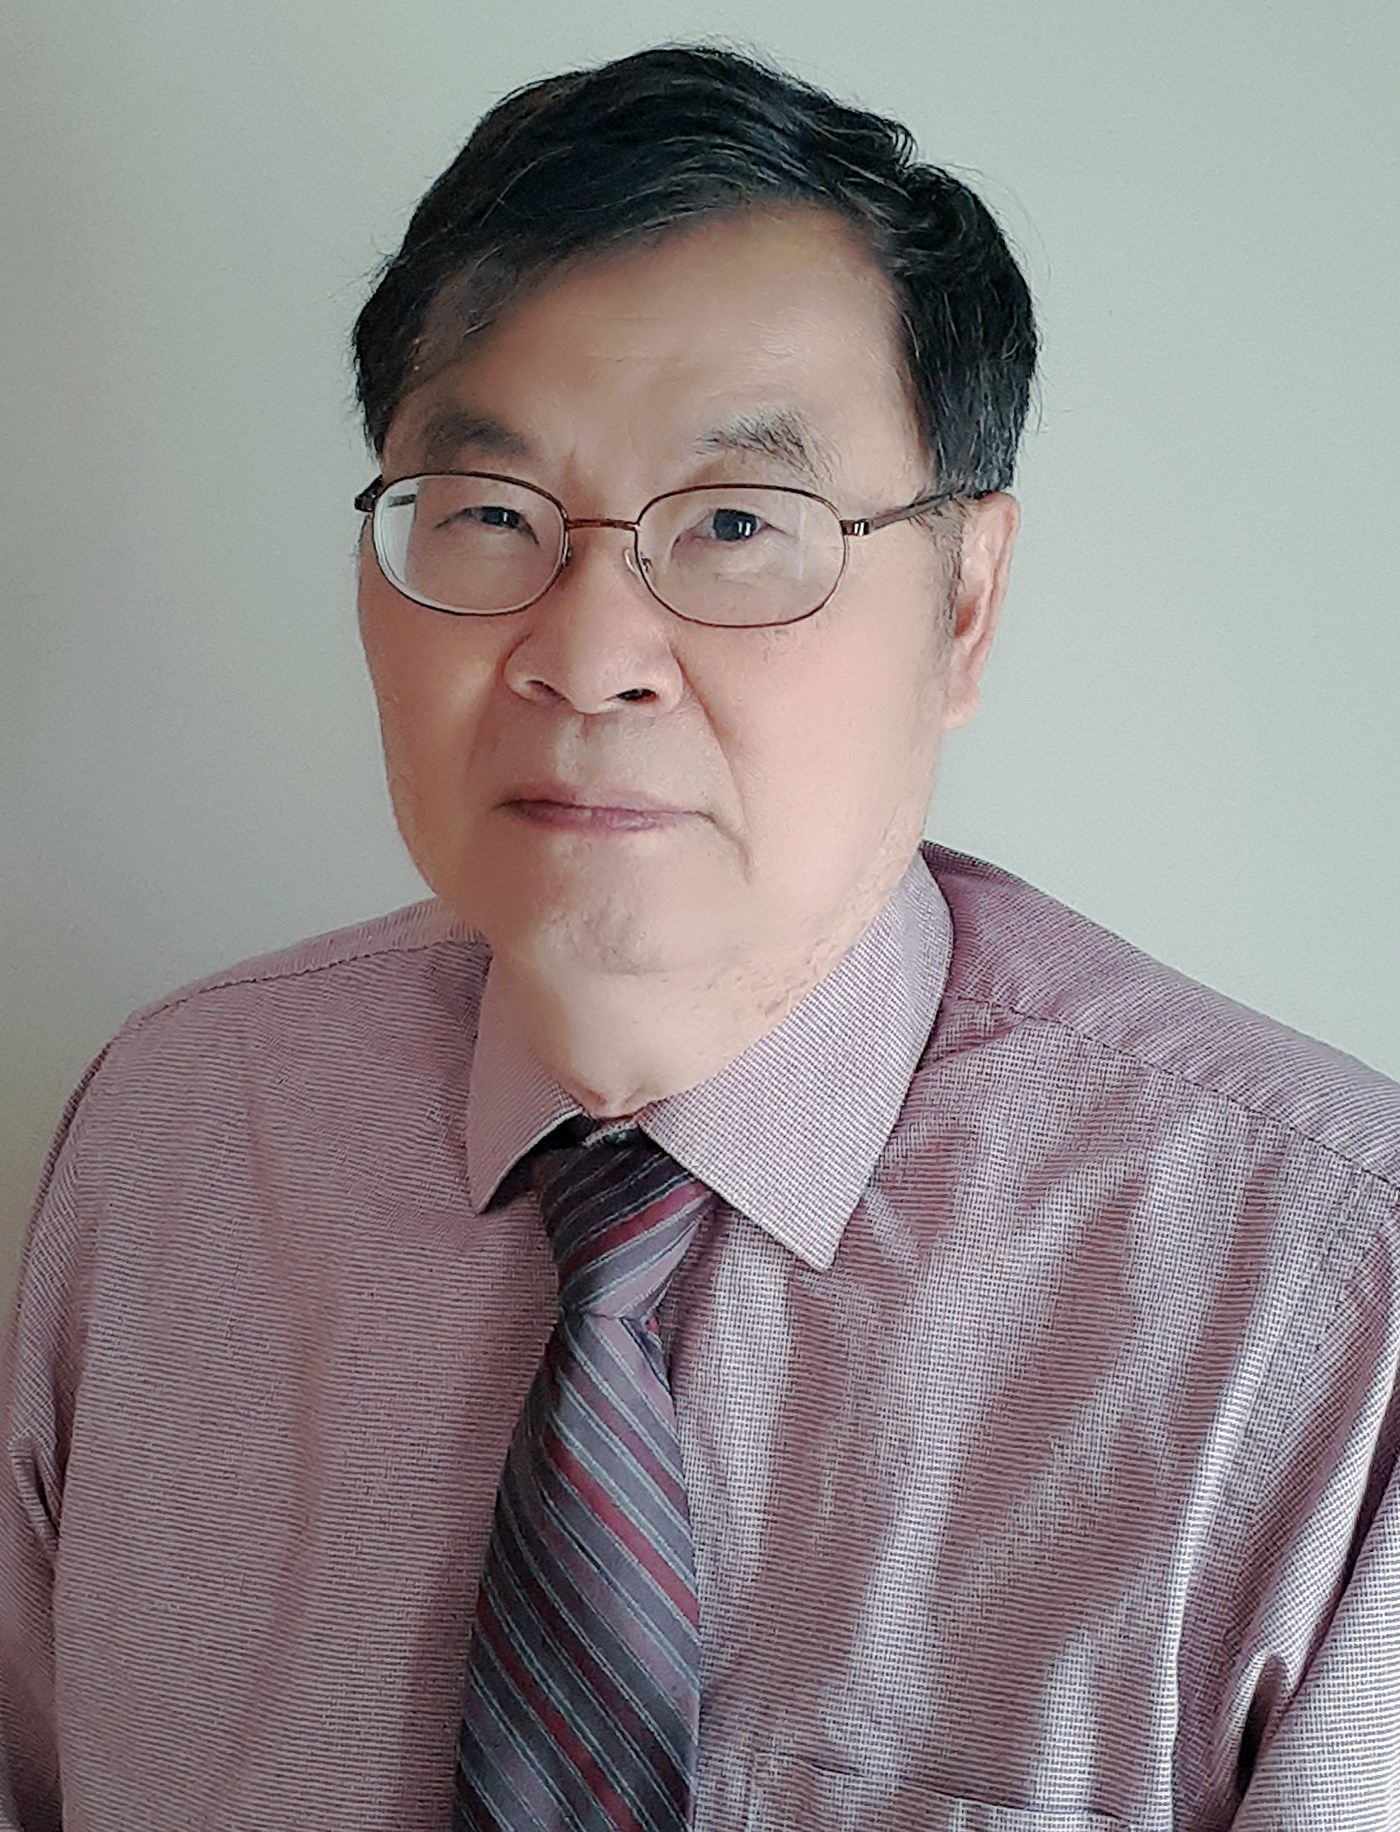 Jan Chan Huang is an Emeritus Professor in the Plastics Engineering Department at UMass Lowell.